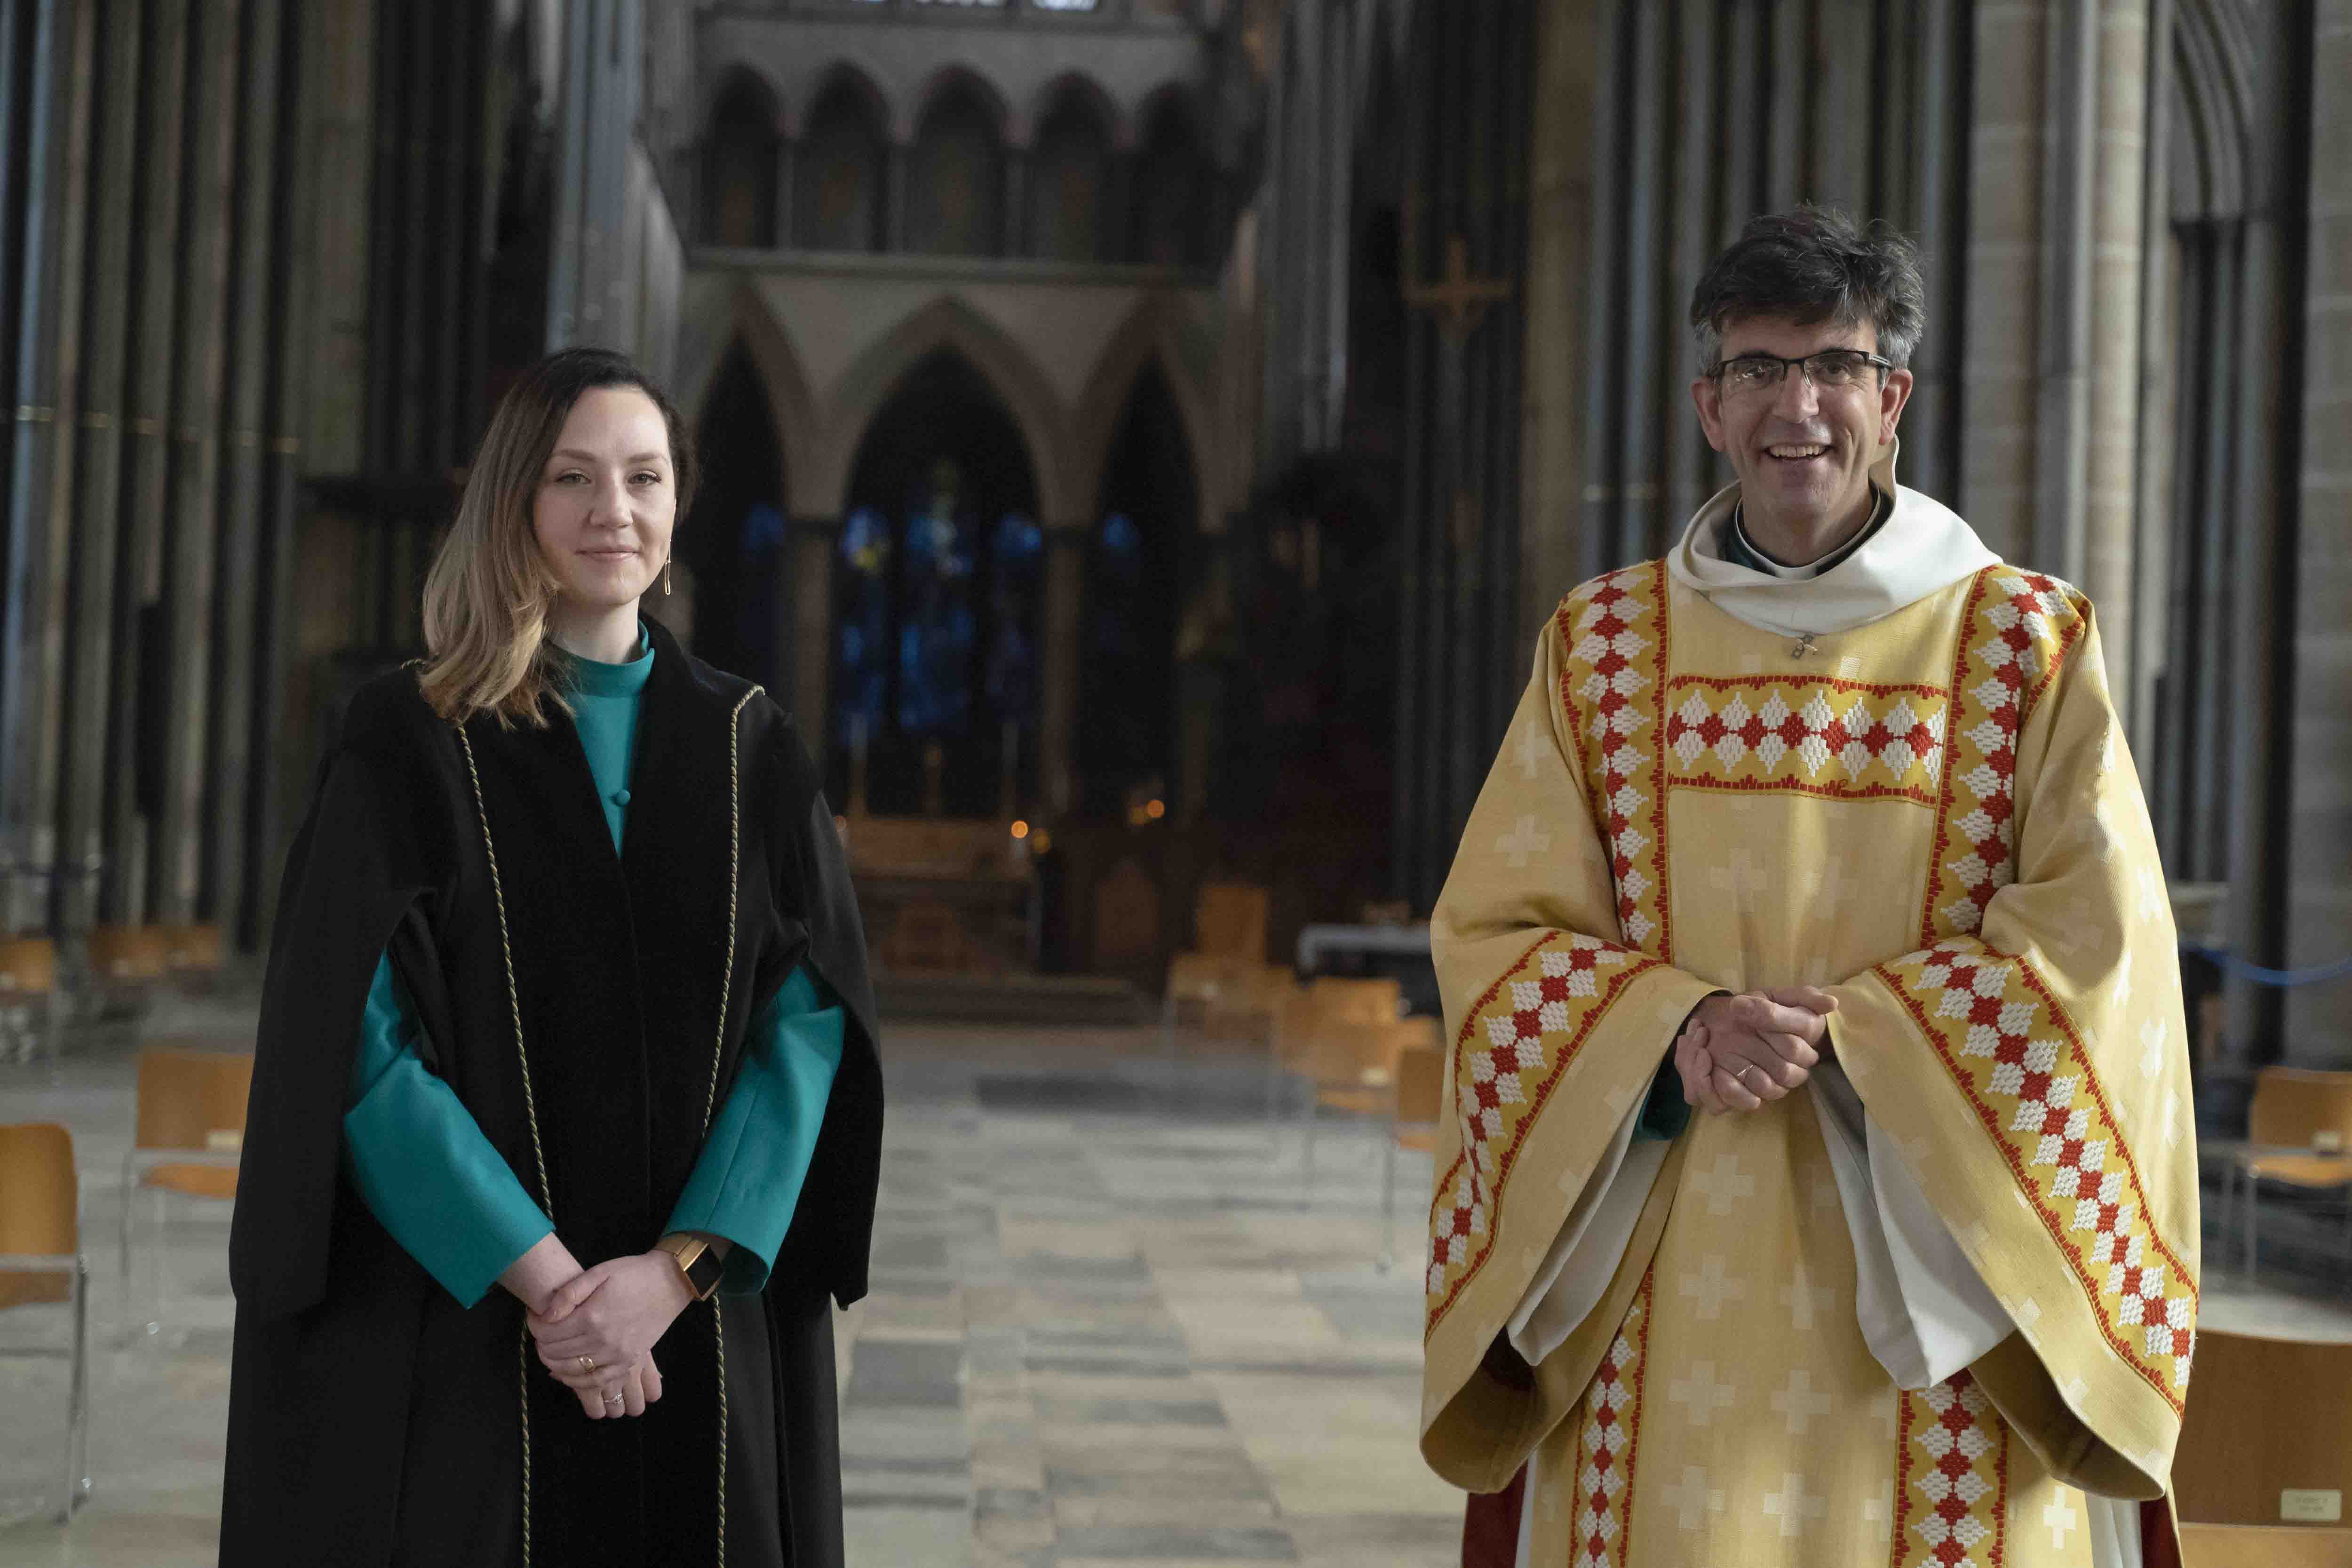 Head Verger Esther Lycett with the Dean of Salisbury, The Very Revd Nicholas Papadopulos. Photo credit: Ash Mills.